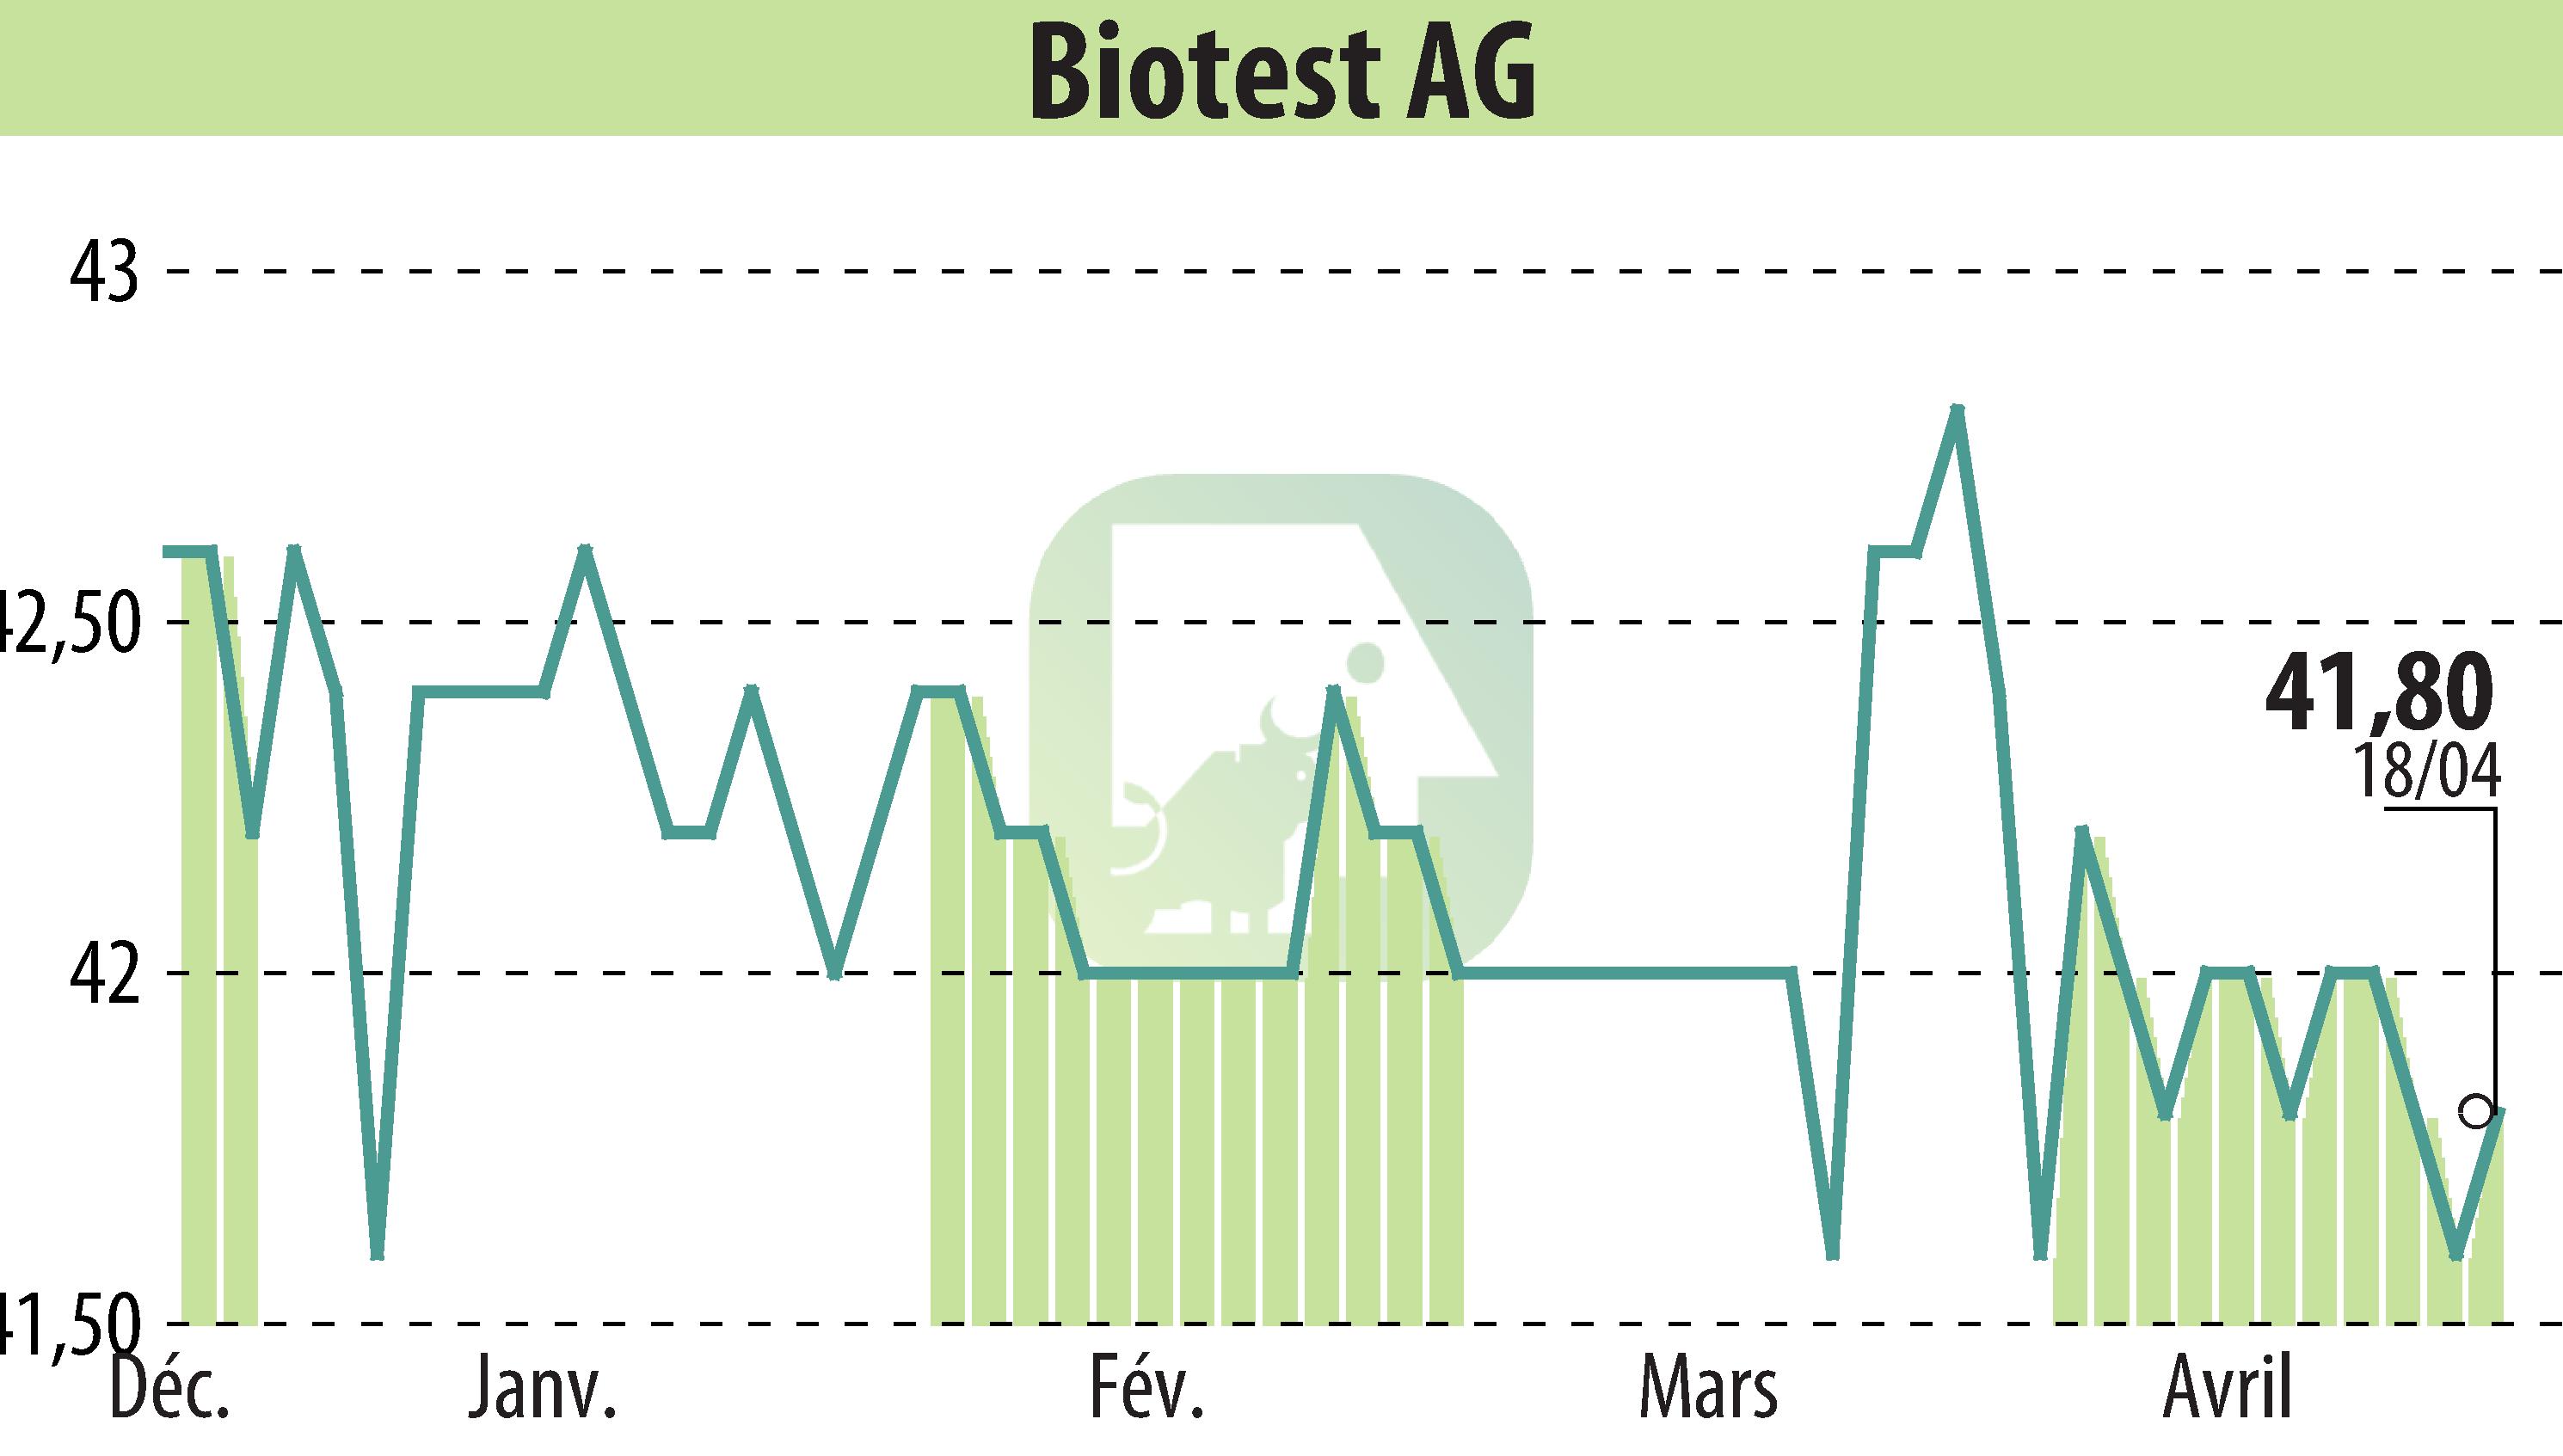 Stock price chart of Biotest AG (EBR:BIO) showing fluctuations.